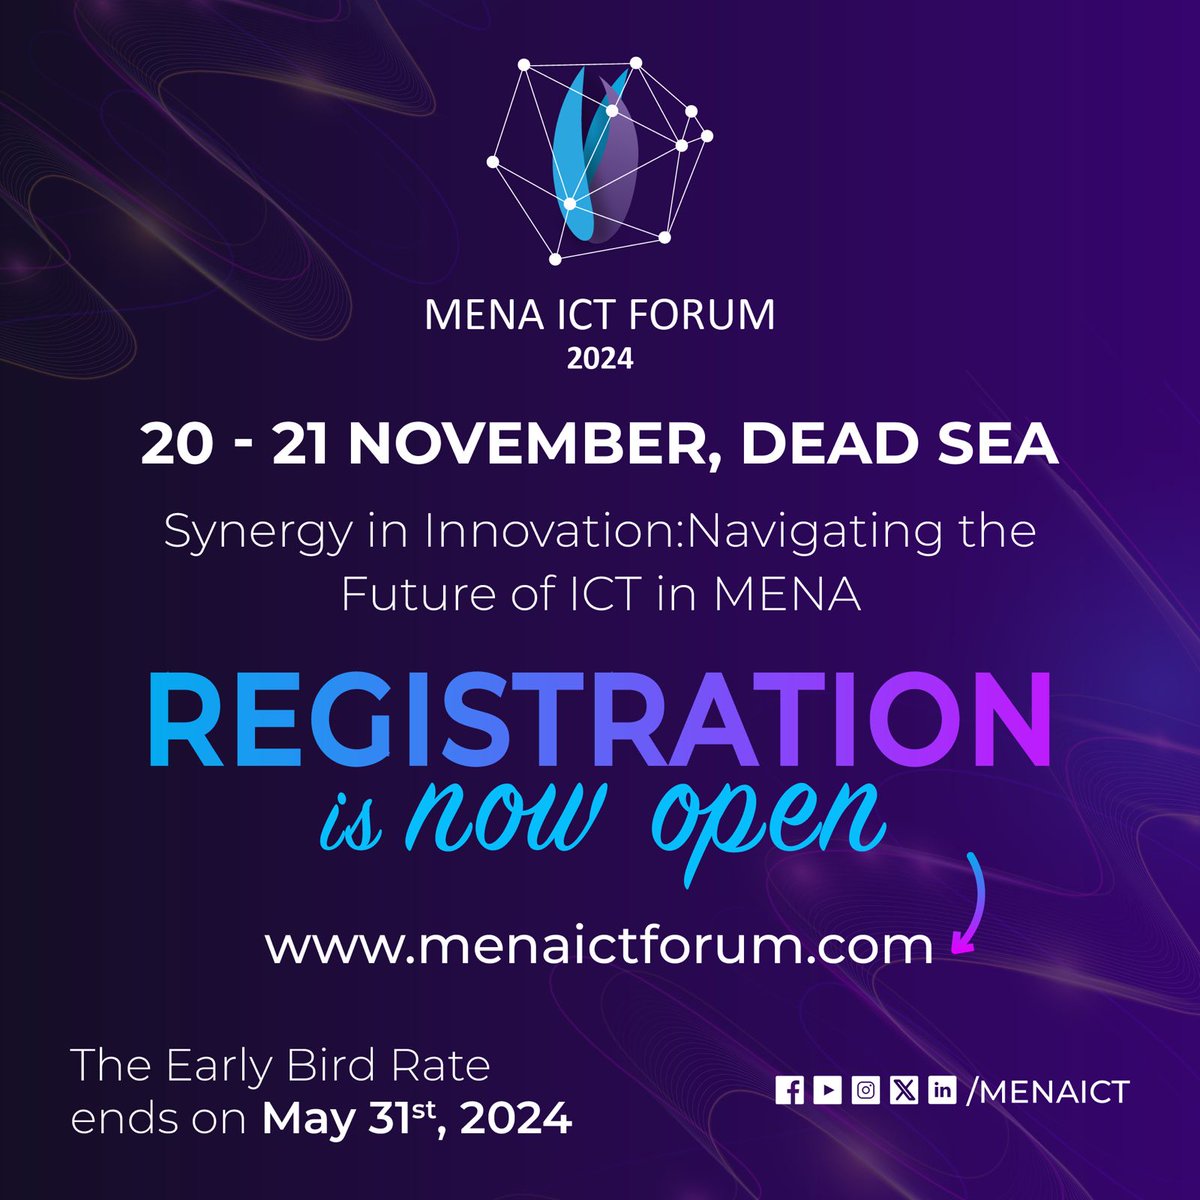 Registration is now open for #MENAICTForum2024 Explore the latest in #Tech, network with industry #leaders, and join the #innovation wave Secure your spot today at menaictforum.com #MENAICTFORUM24 #future_of_ICT #AI #VR #CYBERSECURITY #IoT #WomenInTech